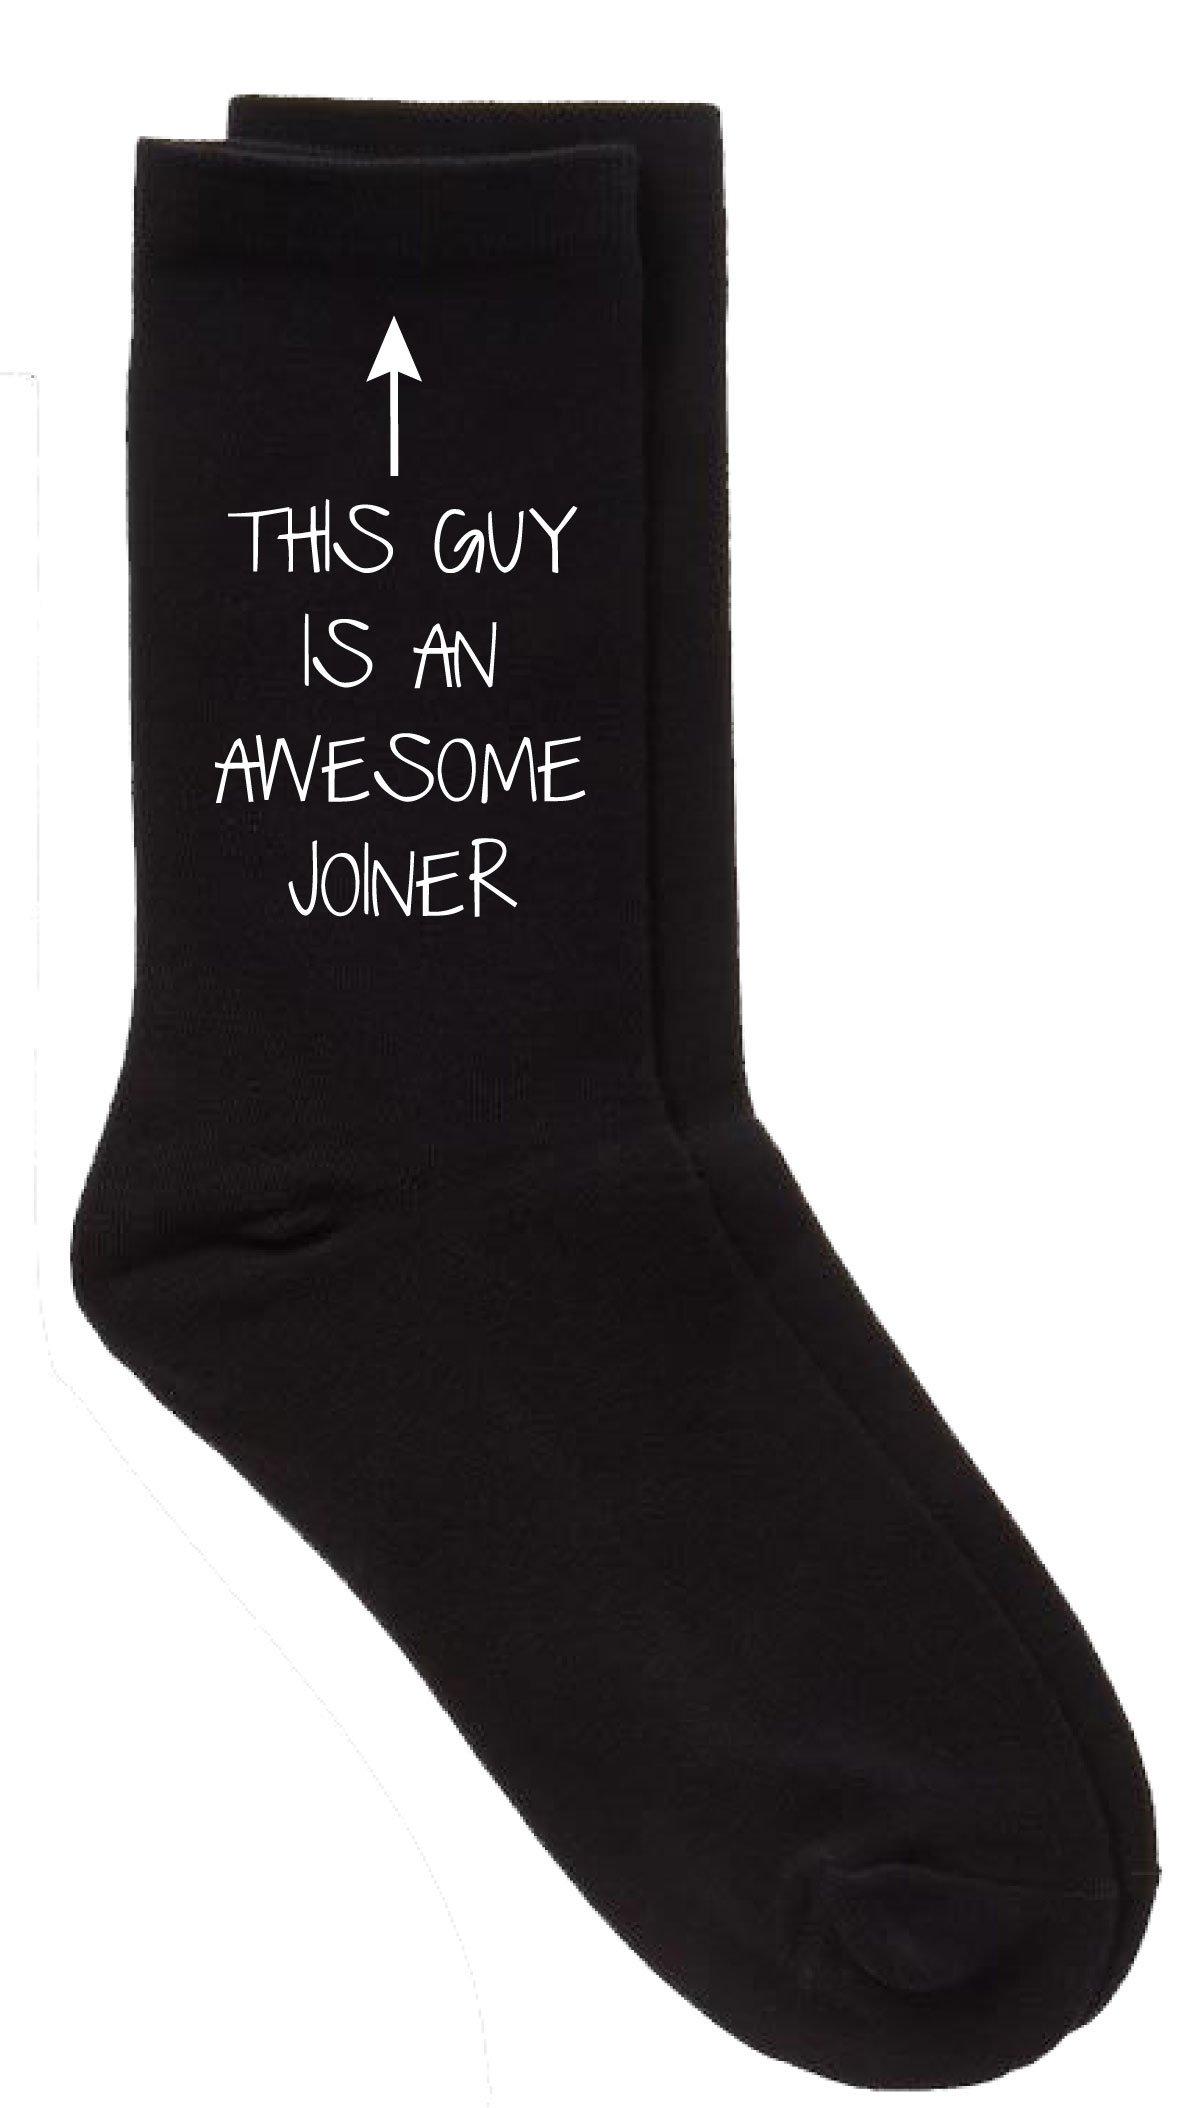 This Guy Is An Awesome Joiner Mens Black Socks